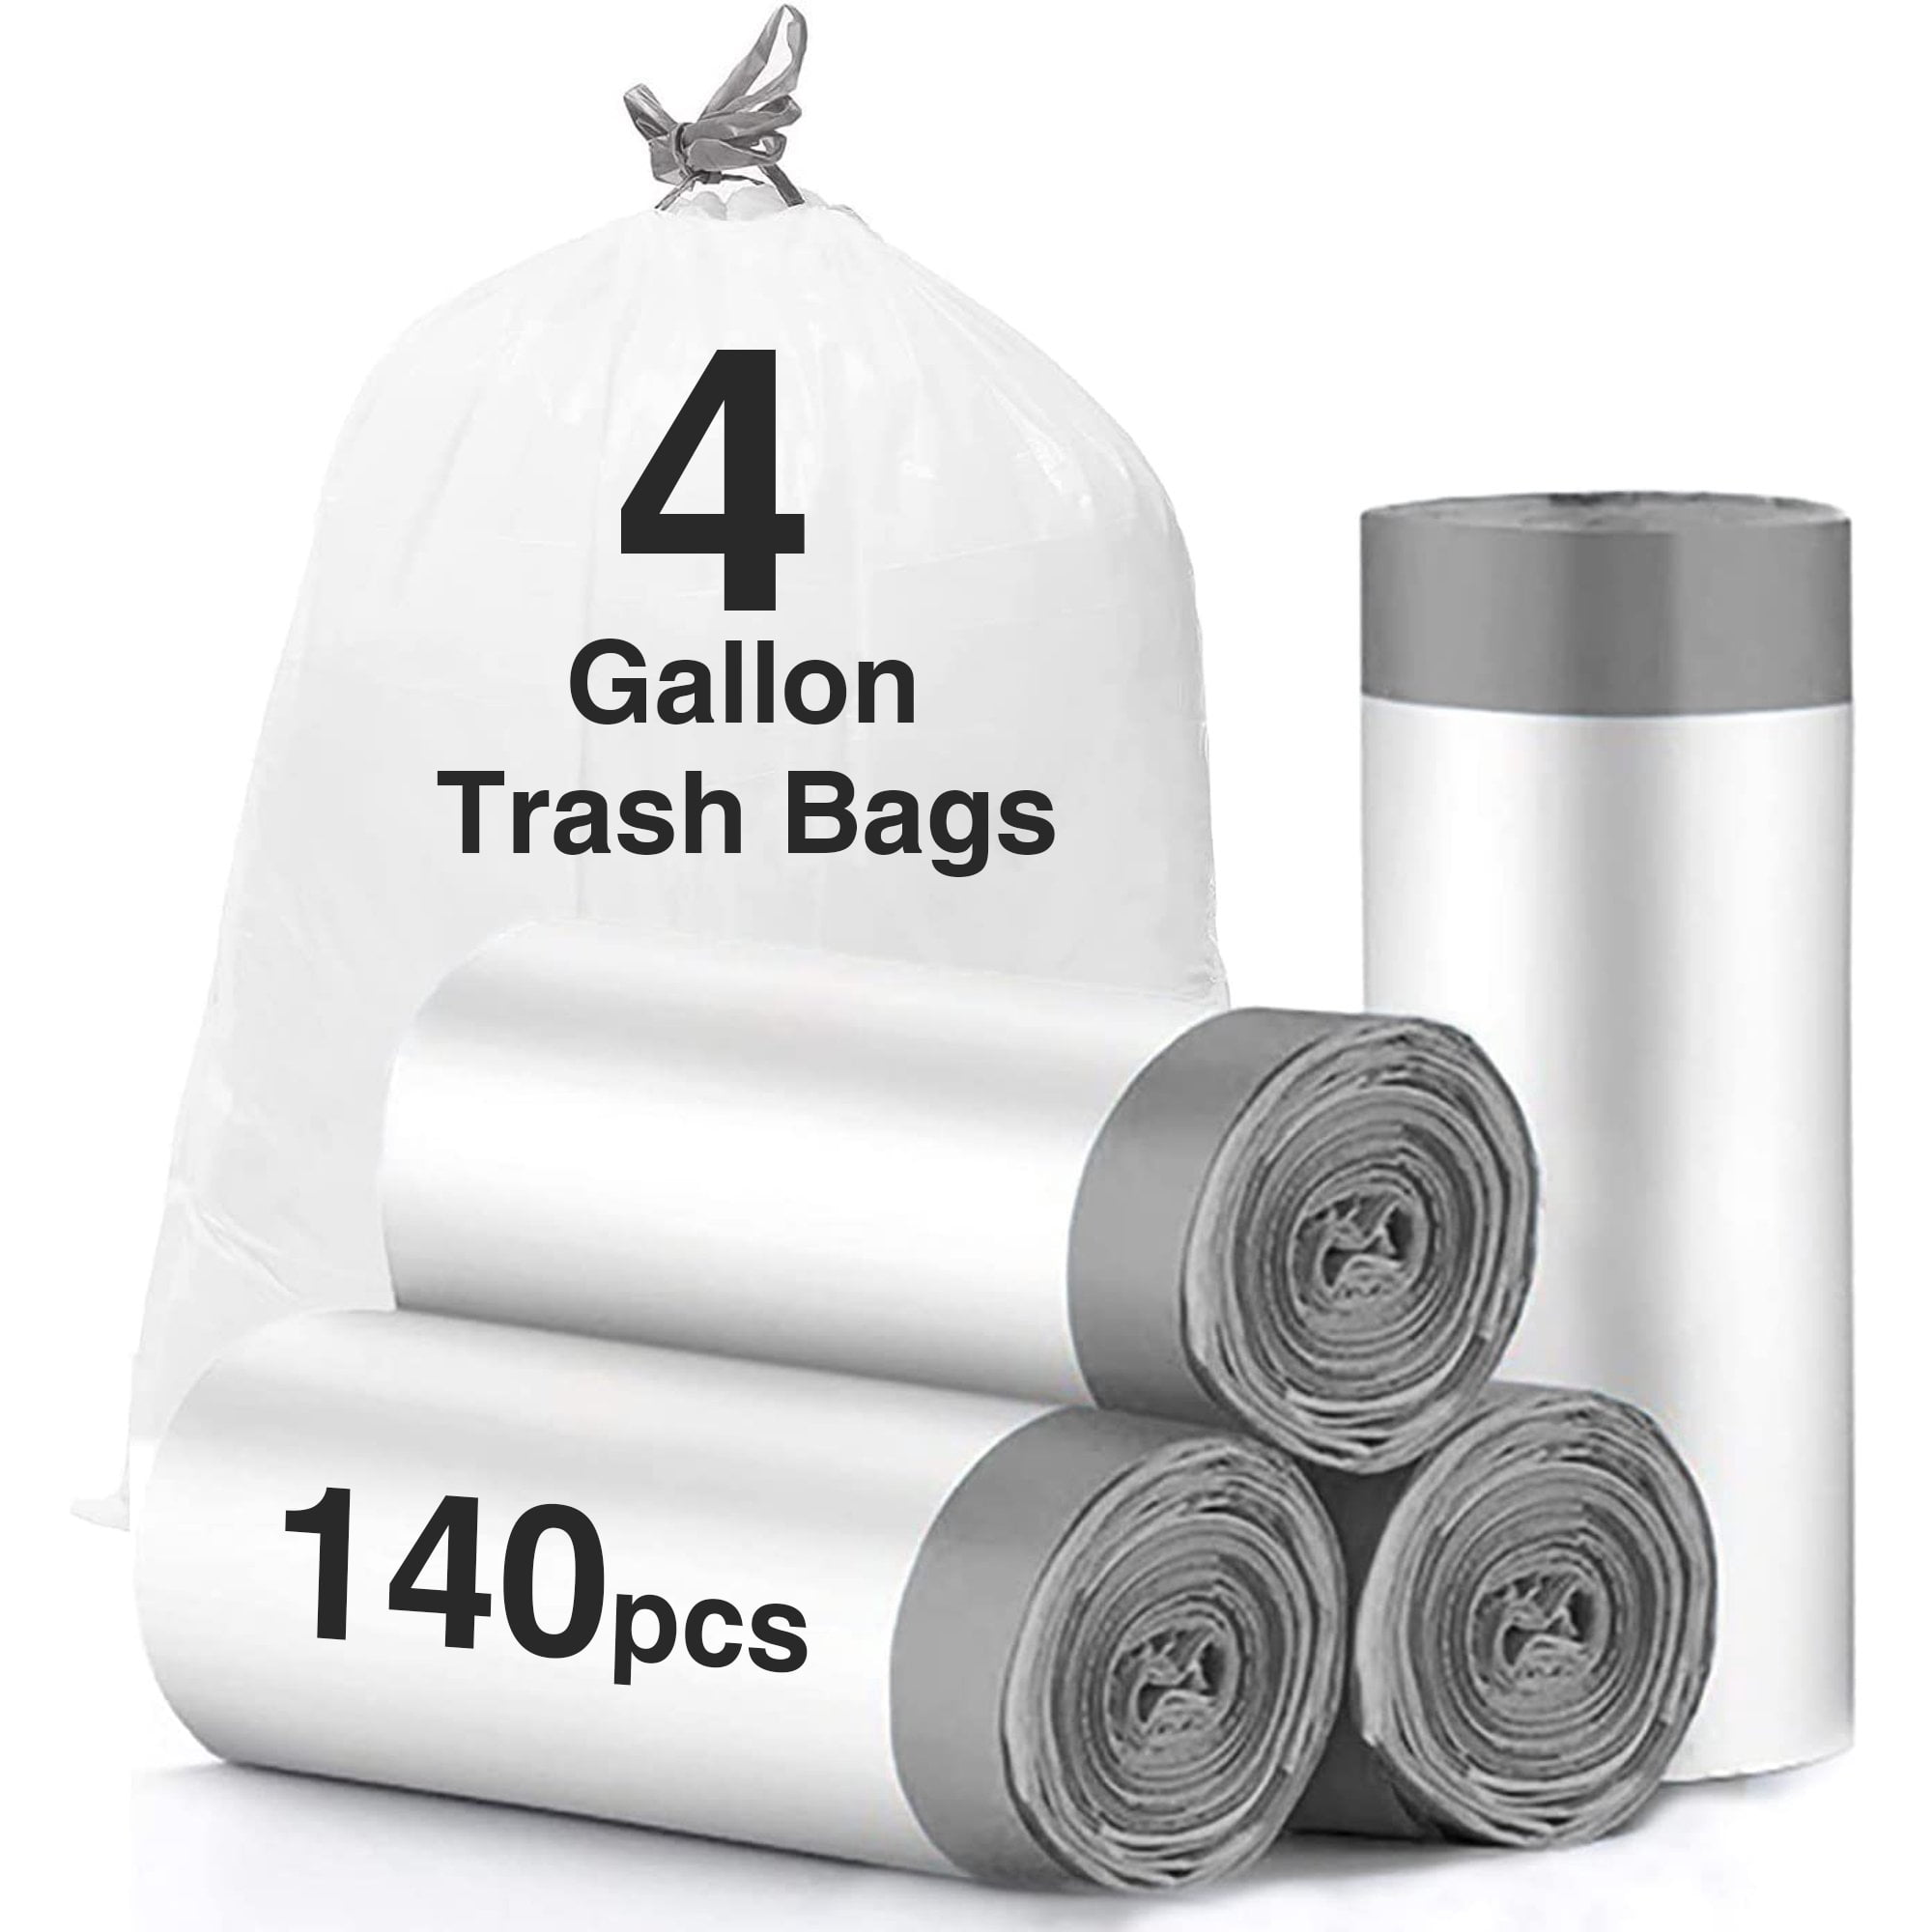 OKKEAI 30L Trash Bags 8 Gallon Medium Garbage Bags Thicker 0.98 MIL Trash  Can Liners Bags Wastebasket Liners for Kitchen,Office, Lawn,Garden,  Patio,60